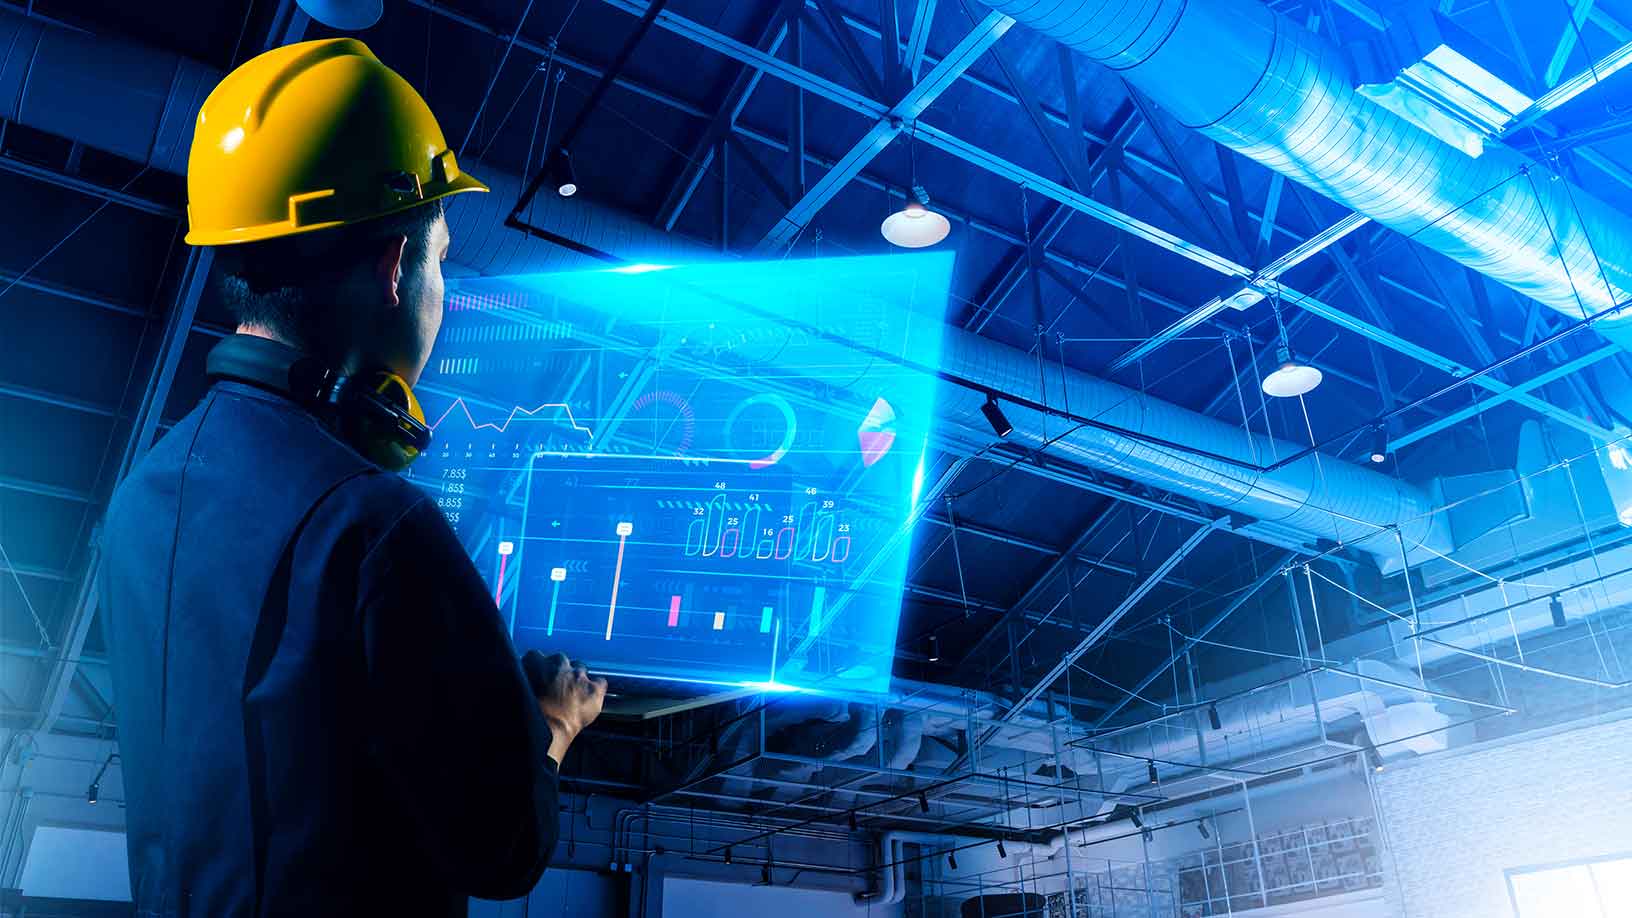 A manufacturing plant employee looks at a digitally enhanced analytics view